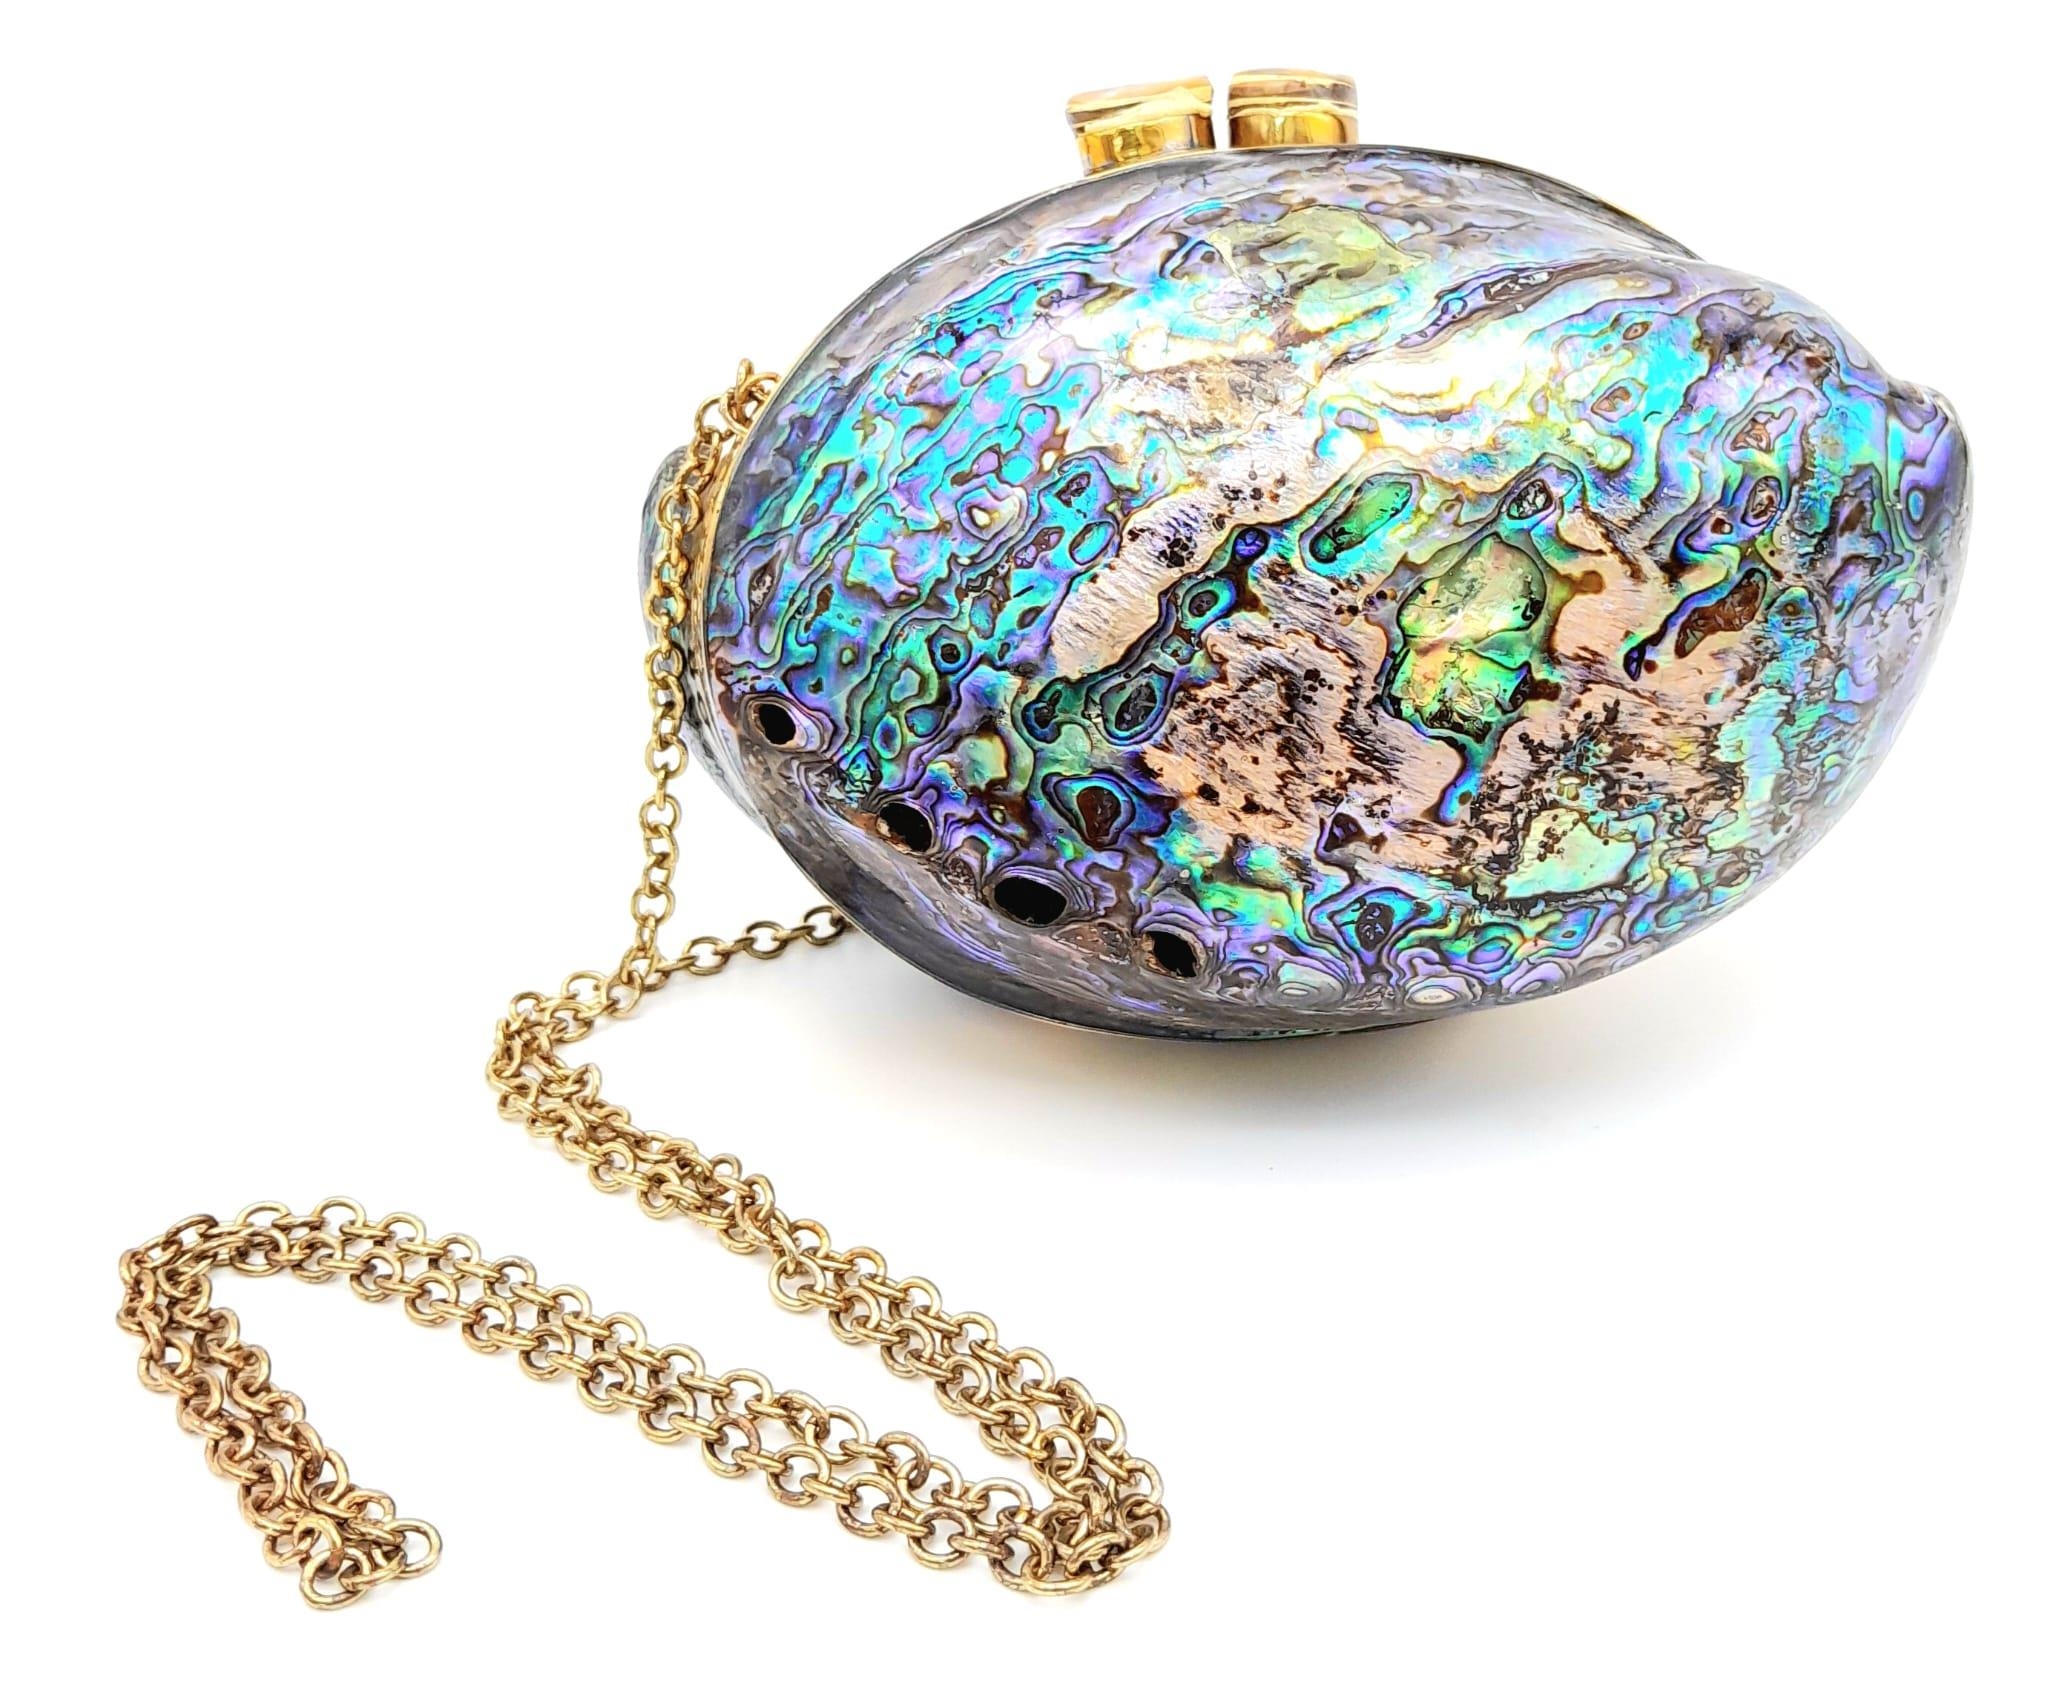 A splendid rare and amazing evening bag, uniquely made from abalone mother of pearl! Supplied with